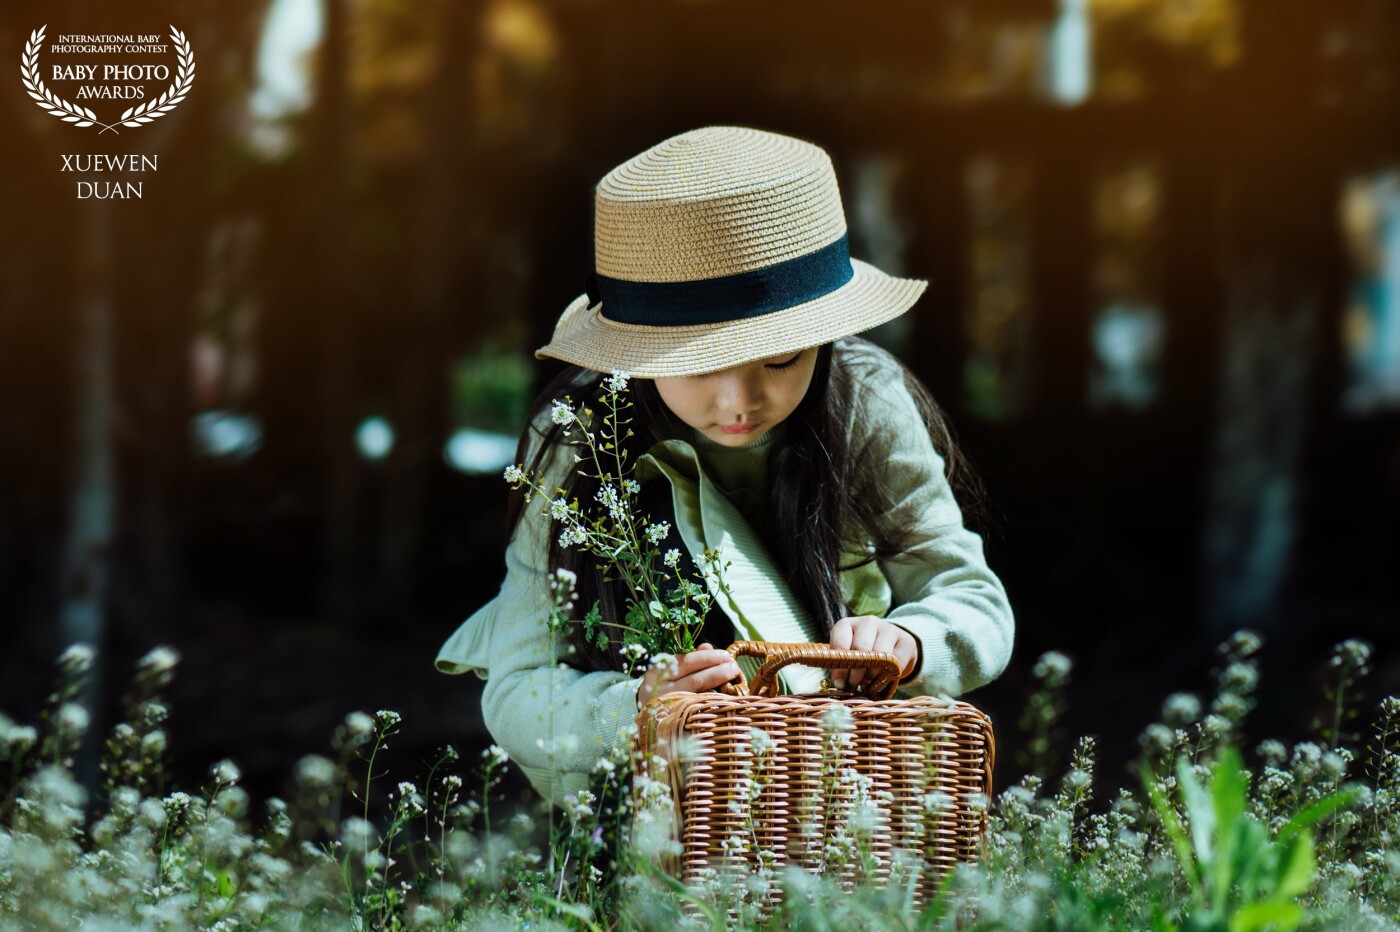 This is an April morning. The sun shines on the grassland from the right front. Zimeng wears a straw hat and carries a small basket. She squats down and looks at the small flowers. Her focused expression is fascinating.